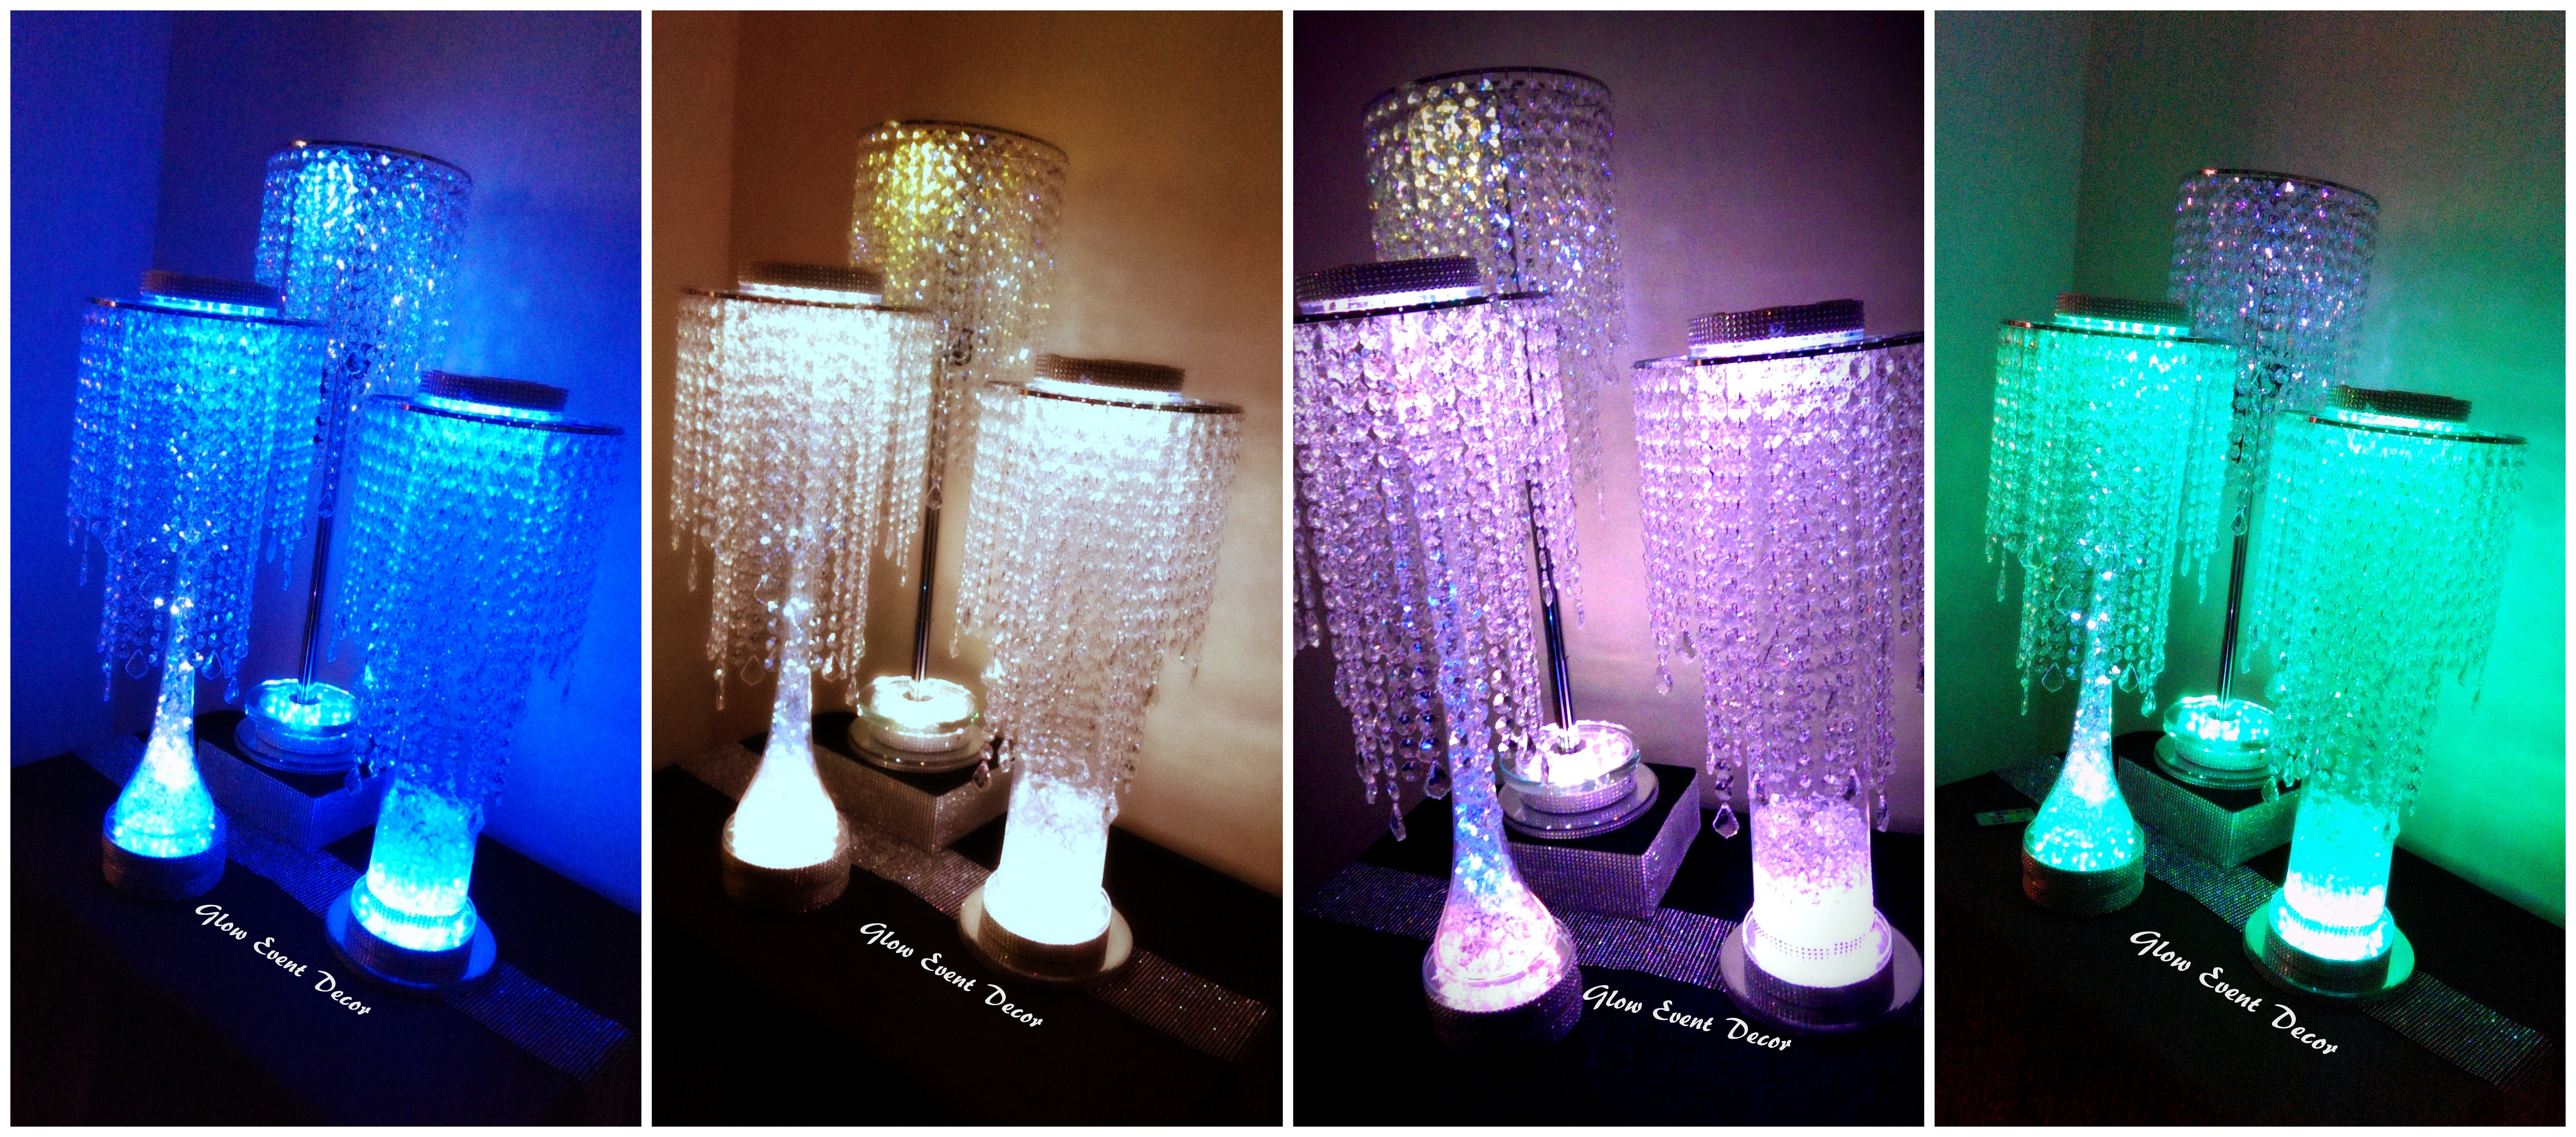 Crystal chandelier LED eiffel tower vase and chrome pole table decoration centrepieces for hire in adelaide, glow event decor